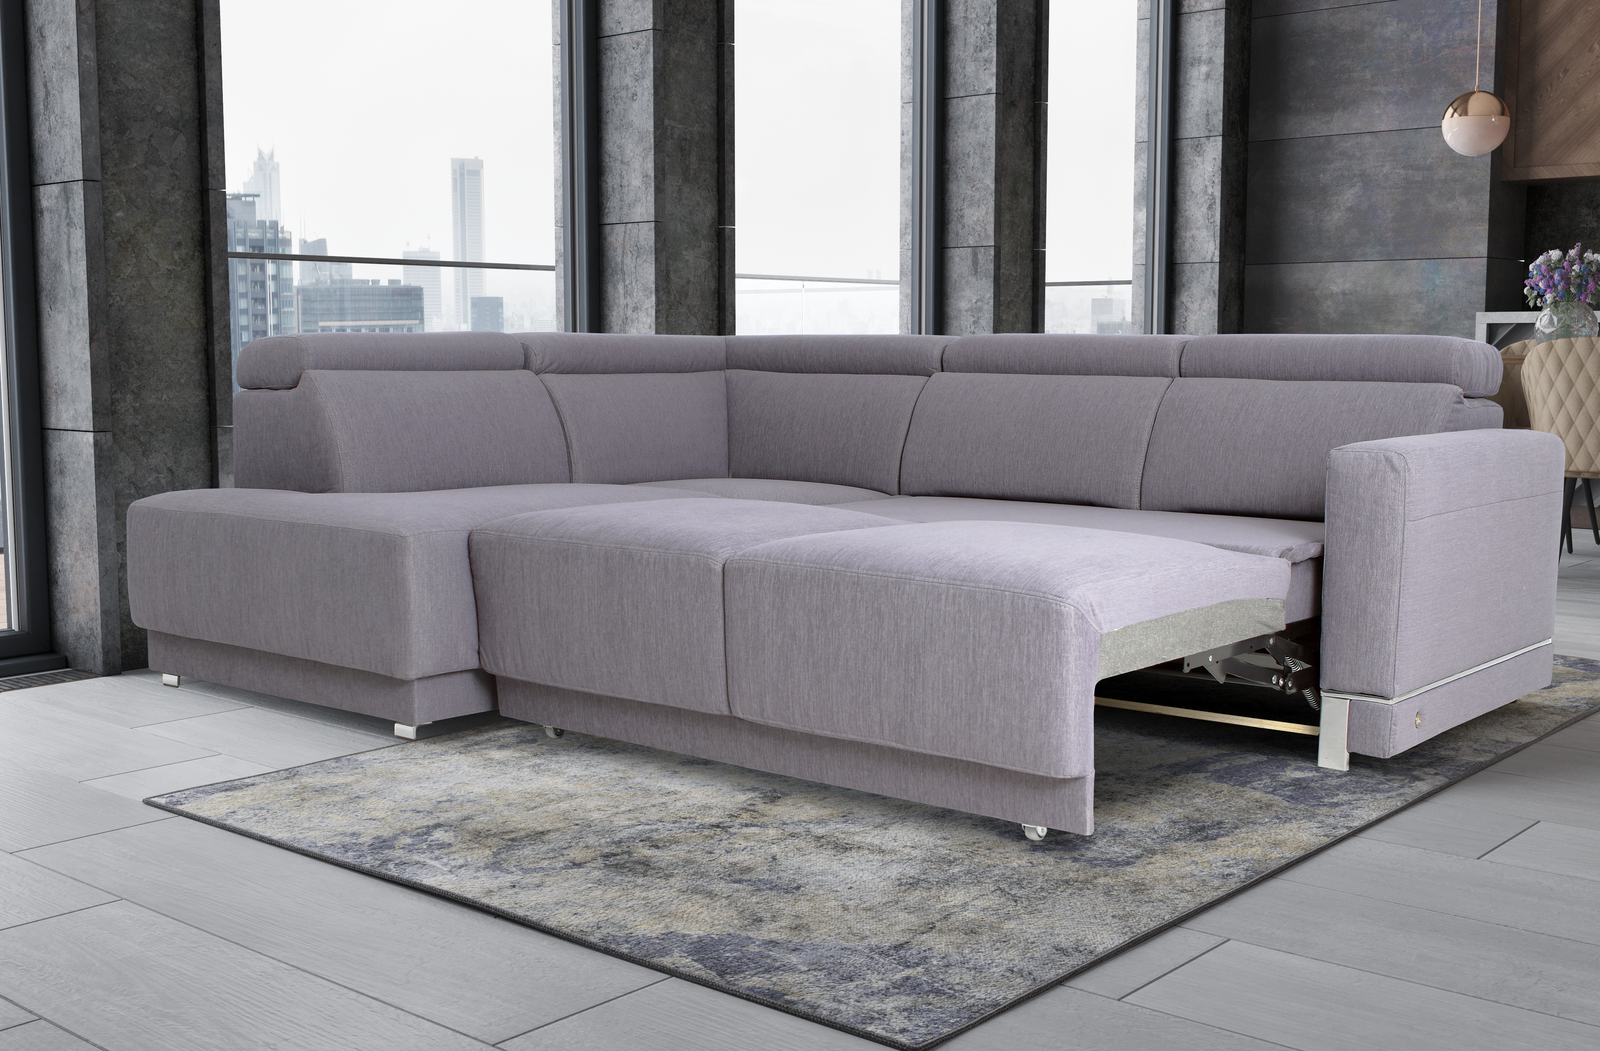 Marburg Gray Sectional with sofa bed and storage